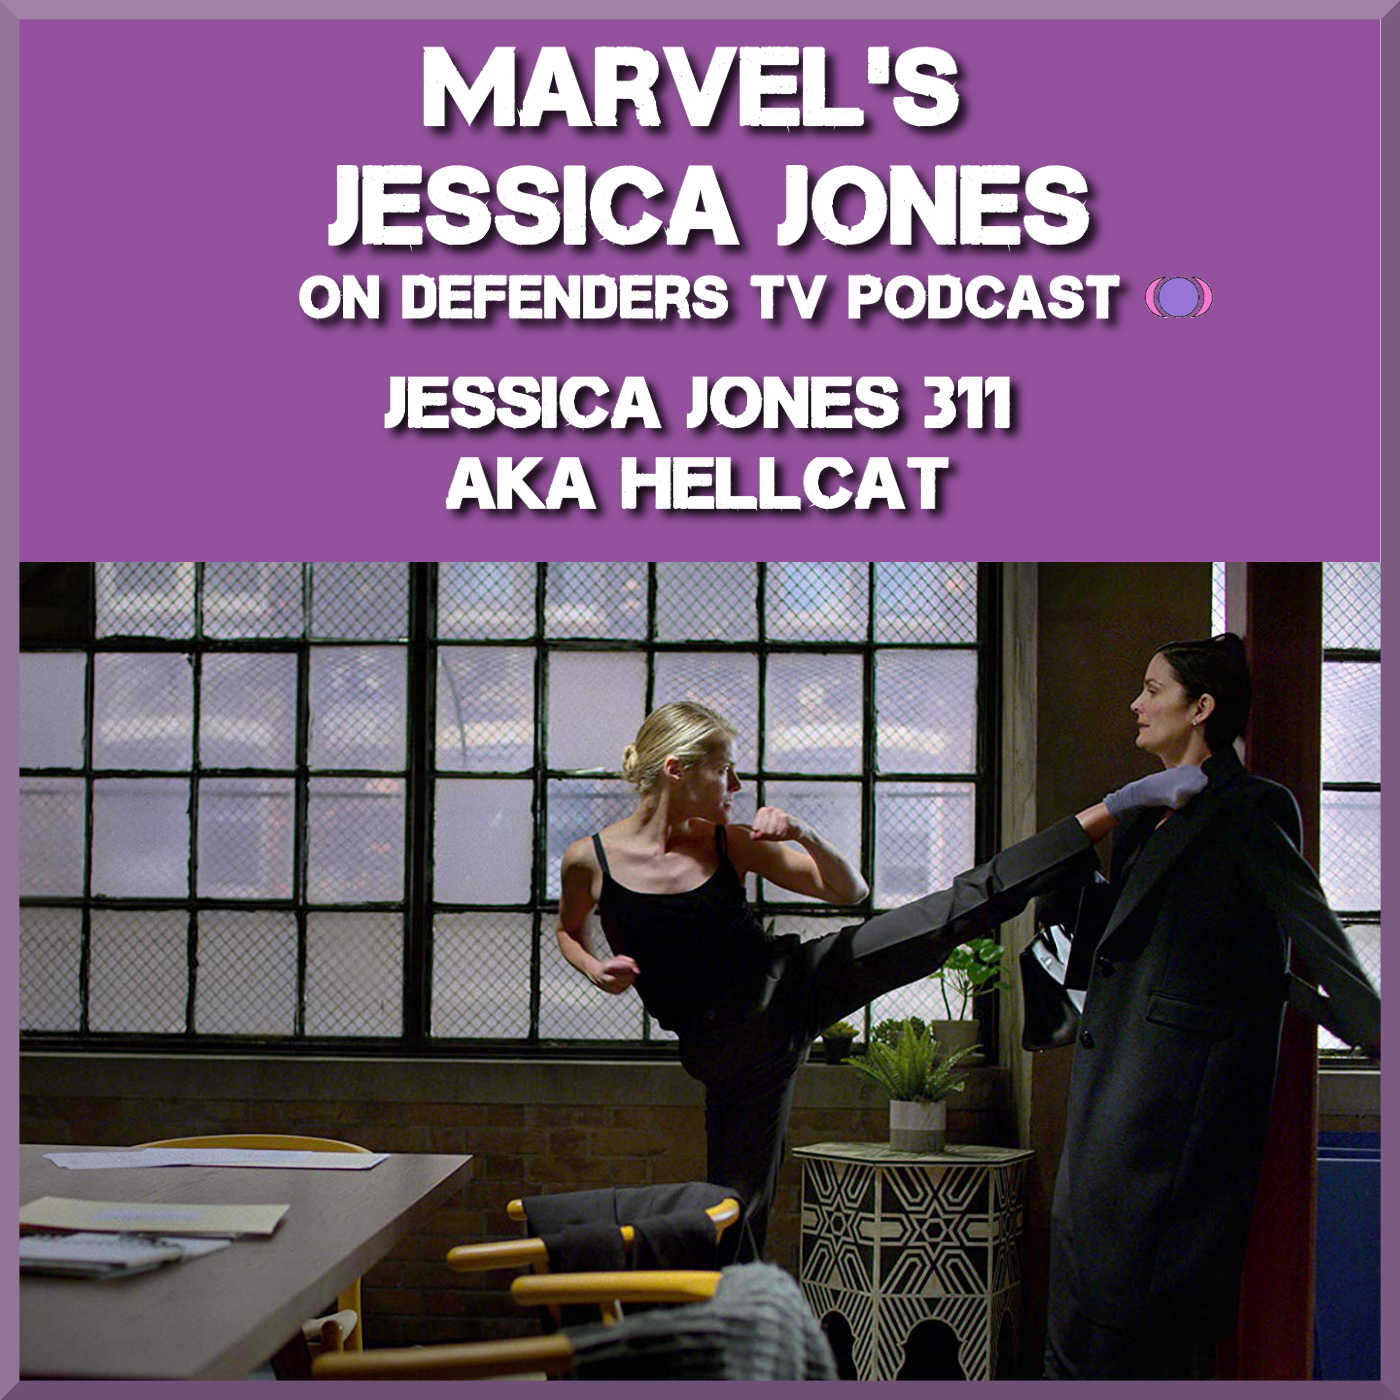 Jessica Jones 311 Review of ”AKA HellCat” by TV Podcast Industries